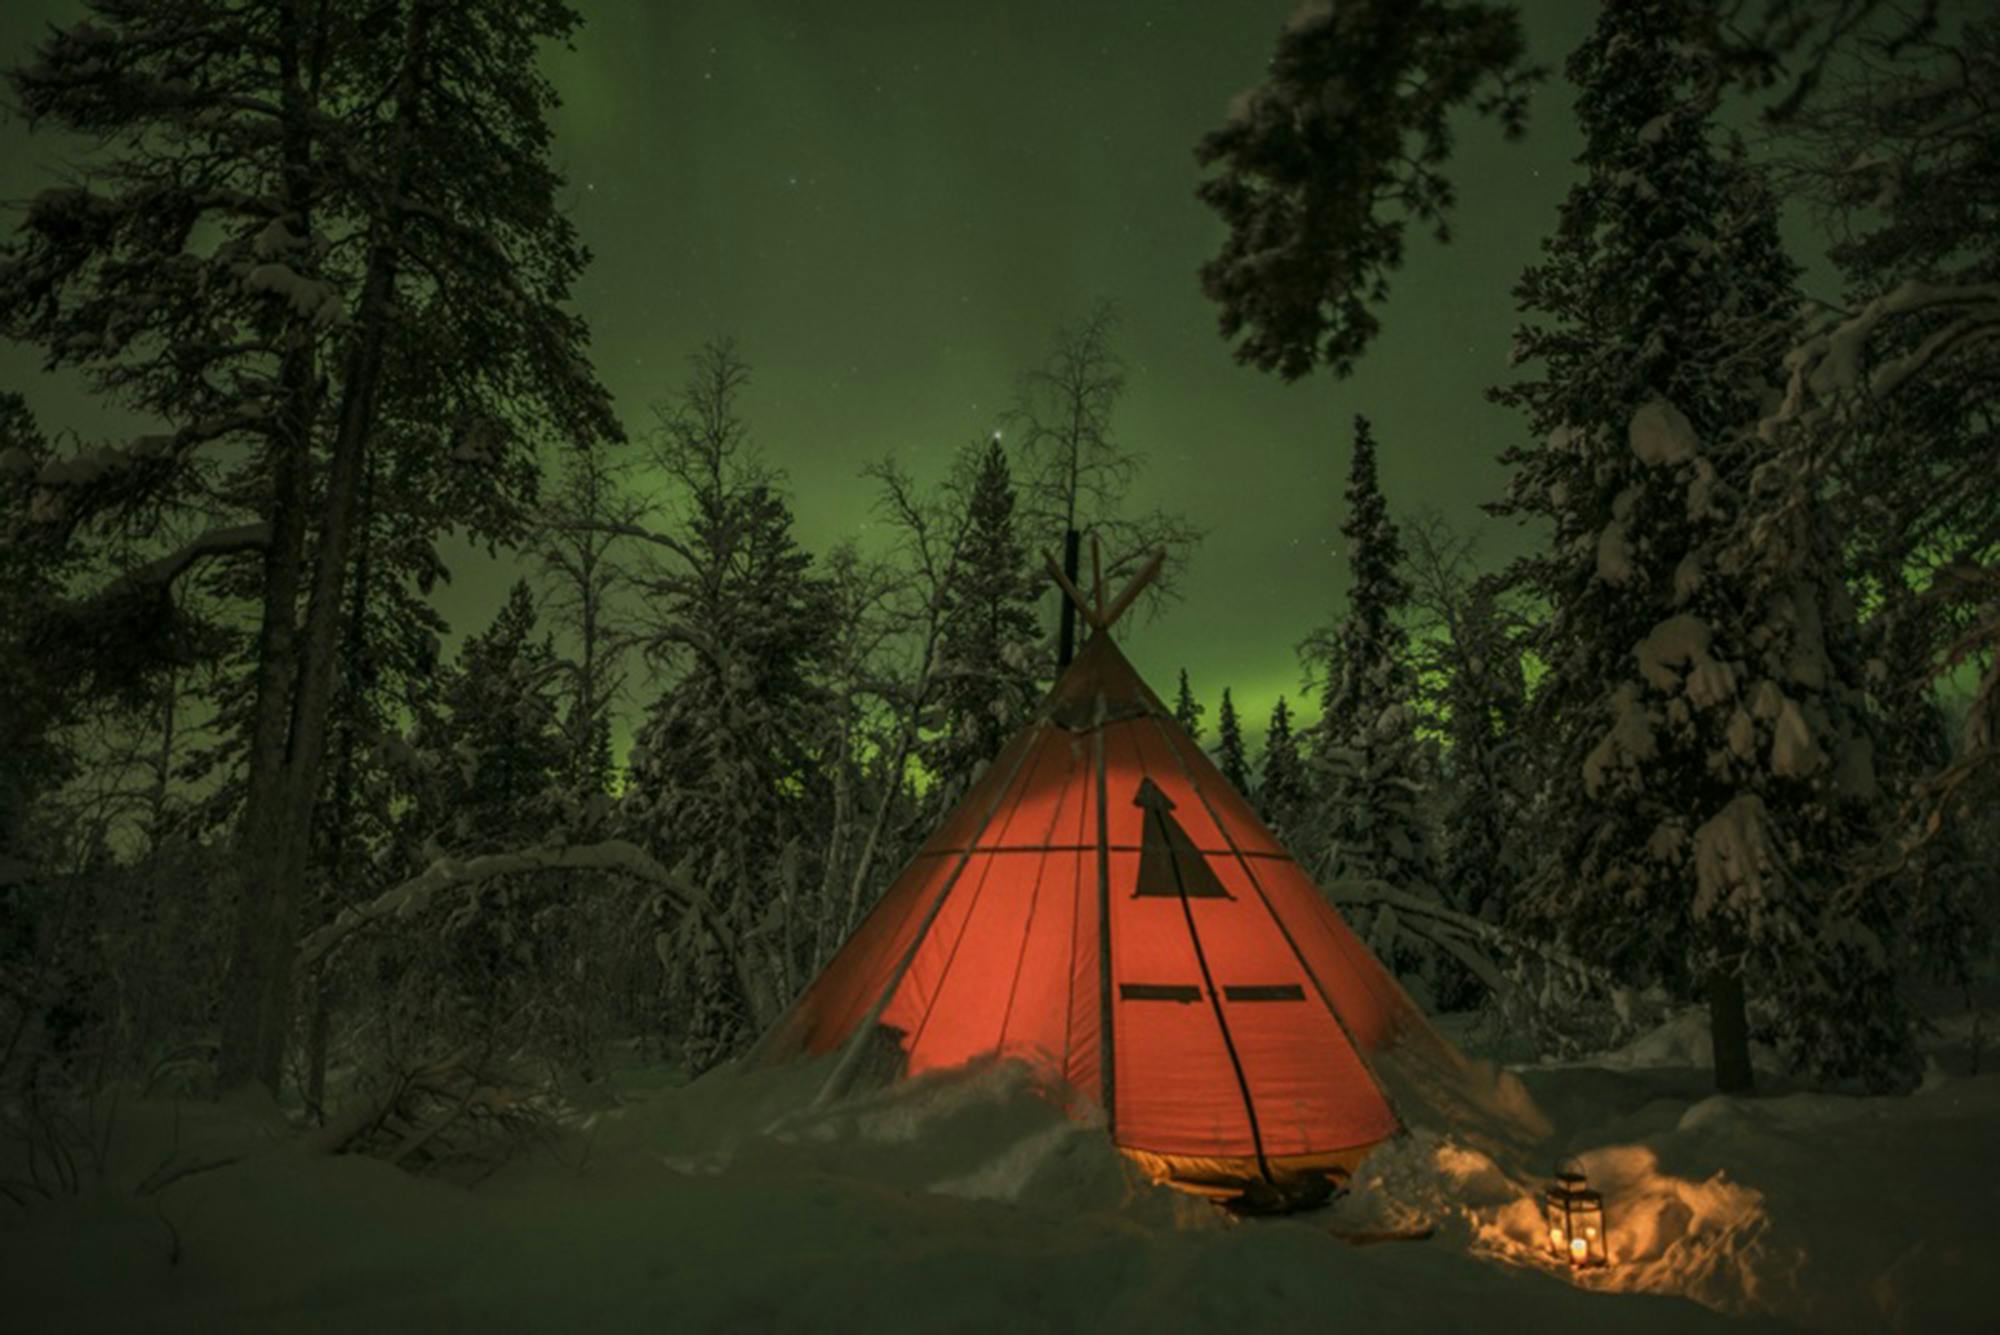 A Swedish Christmas under the Northern Lights